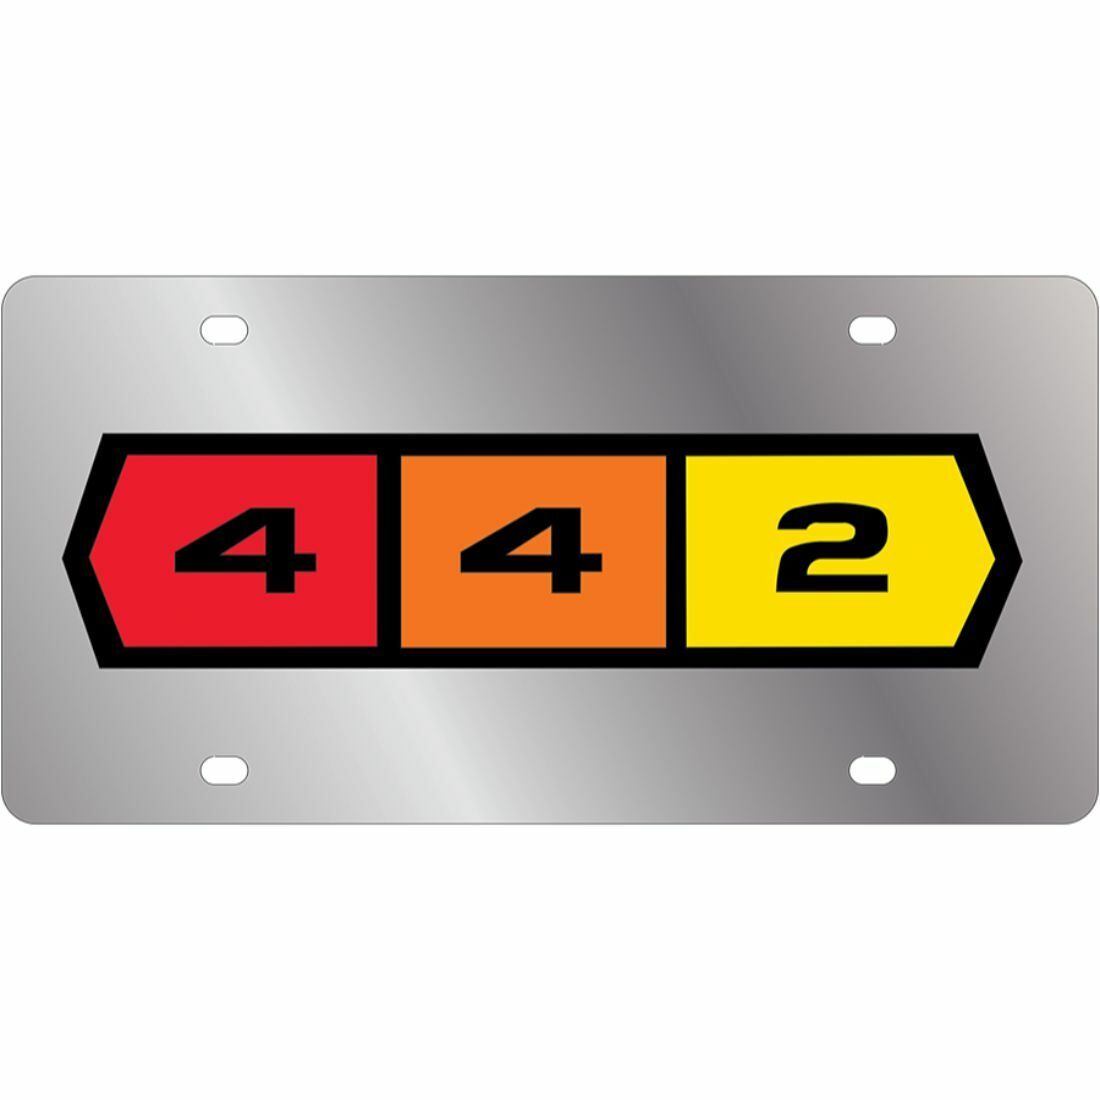 Stainless Steel 442 Black 442 Red Orange Yellow License Plate Frame 3D Novelty